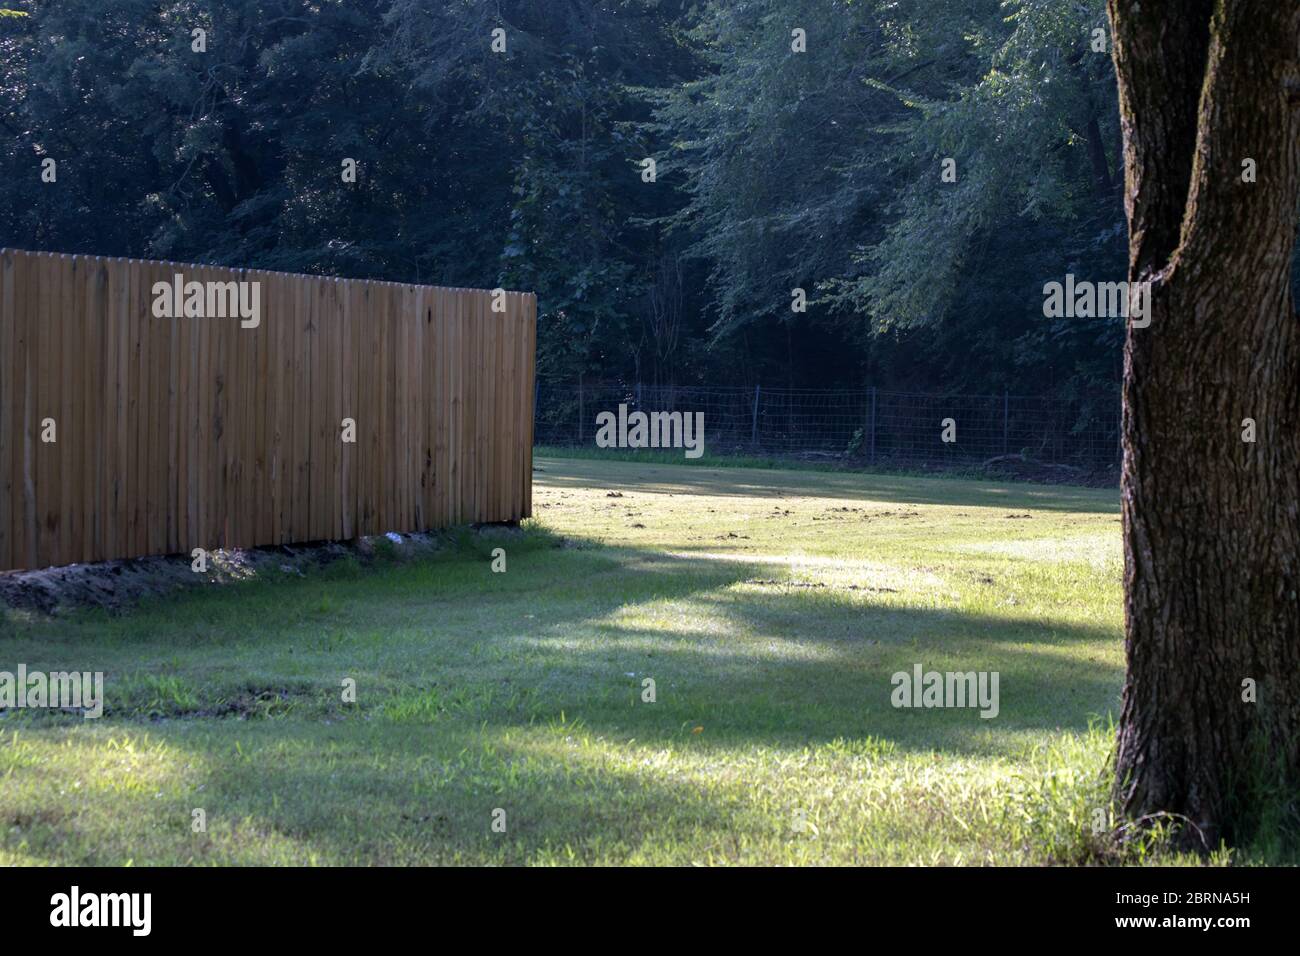 A wooden privacy fence indicates boundary lines at this pretty little Mississippi park. Bokeh. Stock Photo